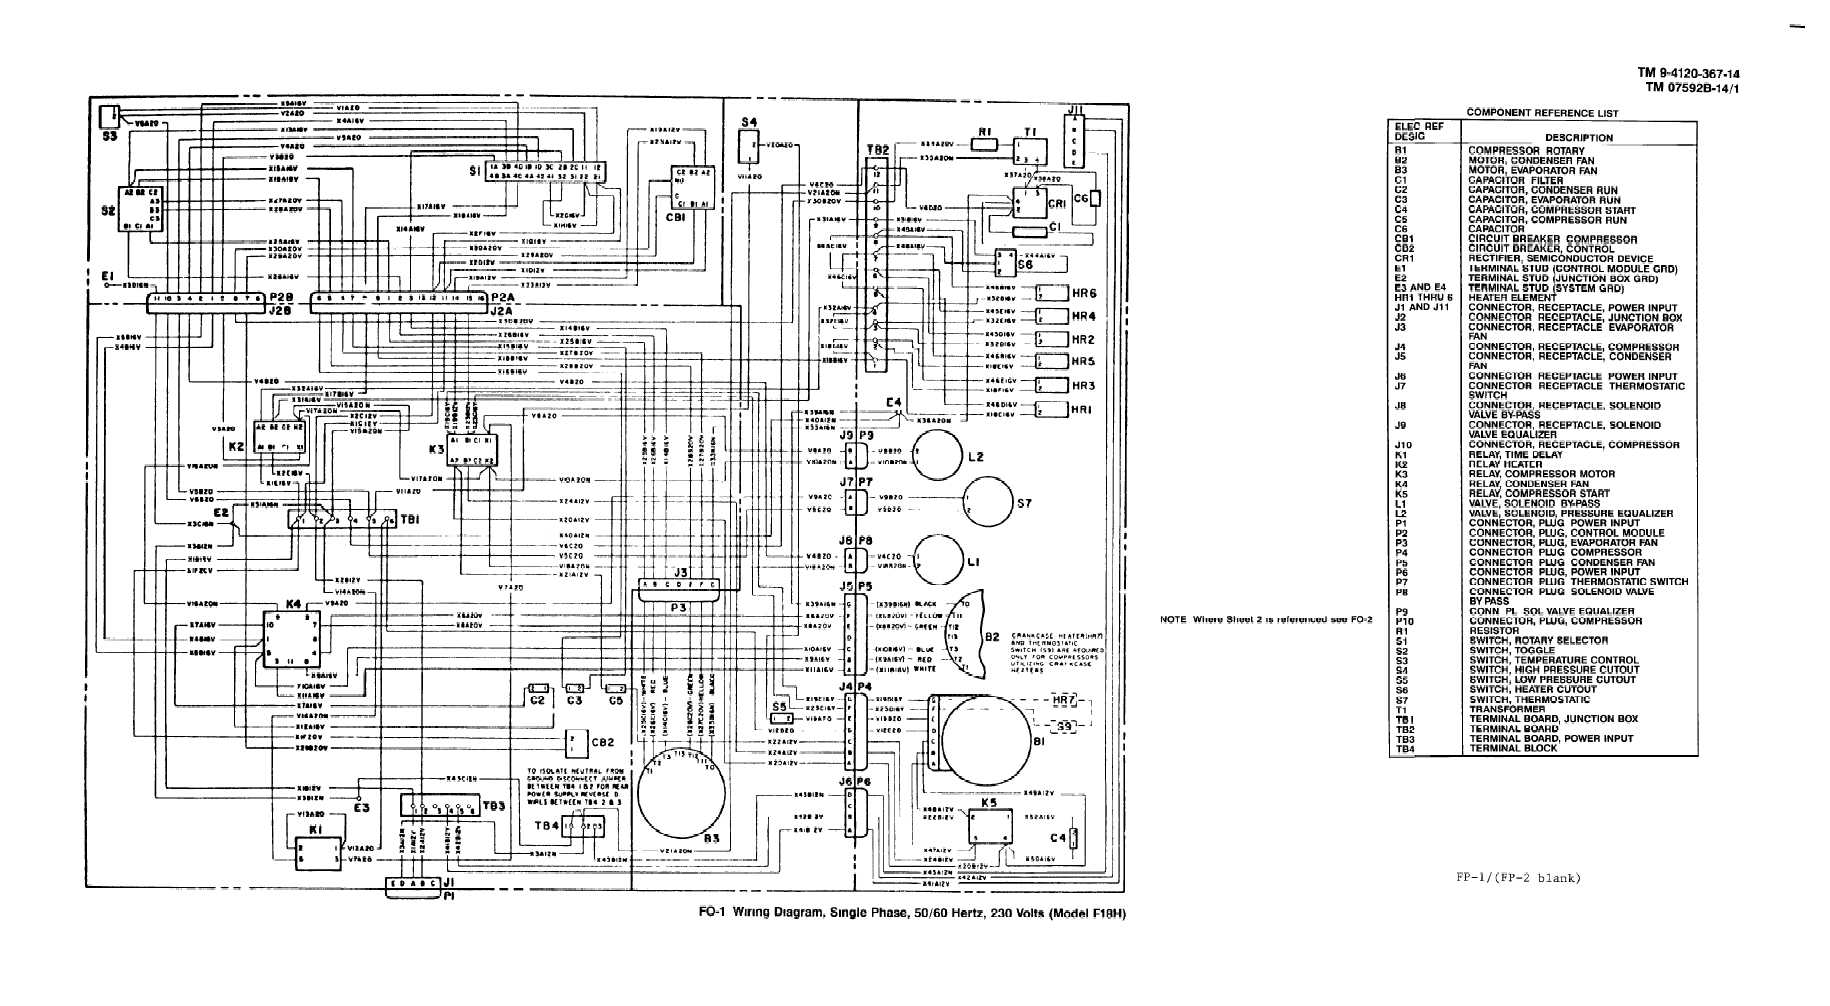 Home Single Phase House Wiring Diagram from airconditioningmanuals.tpub.com